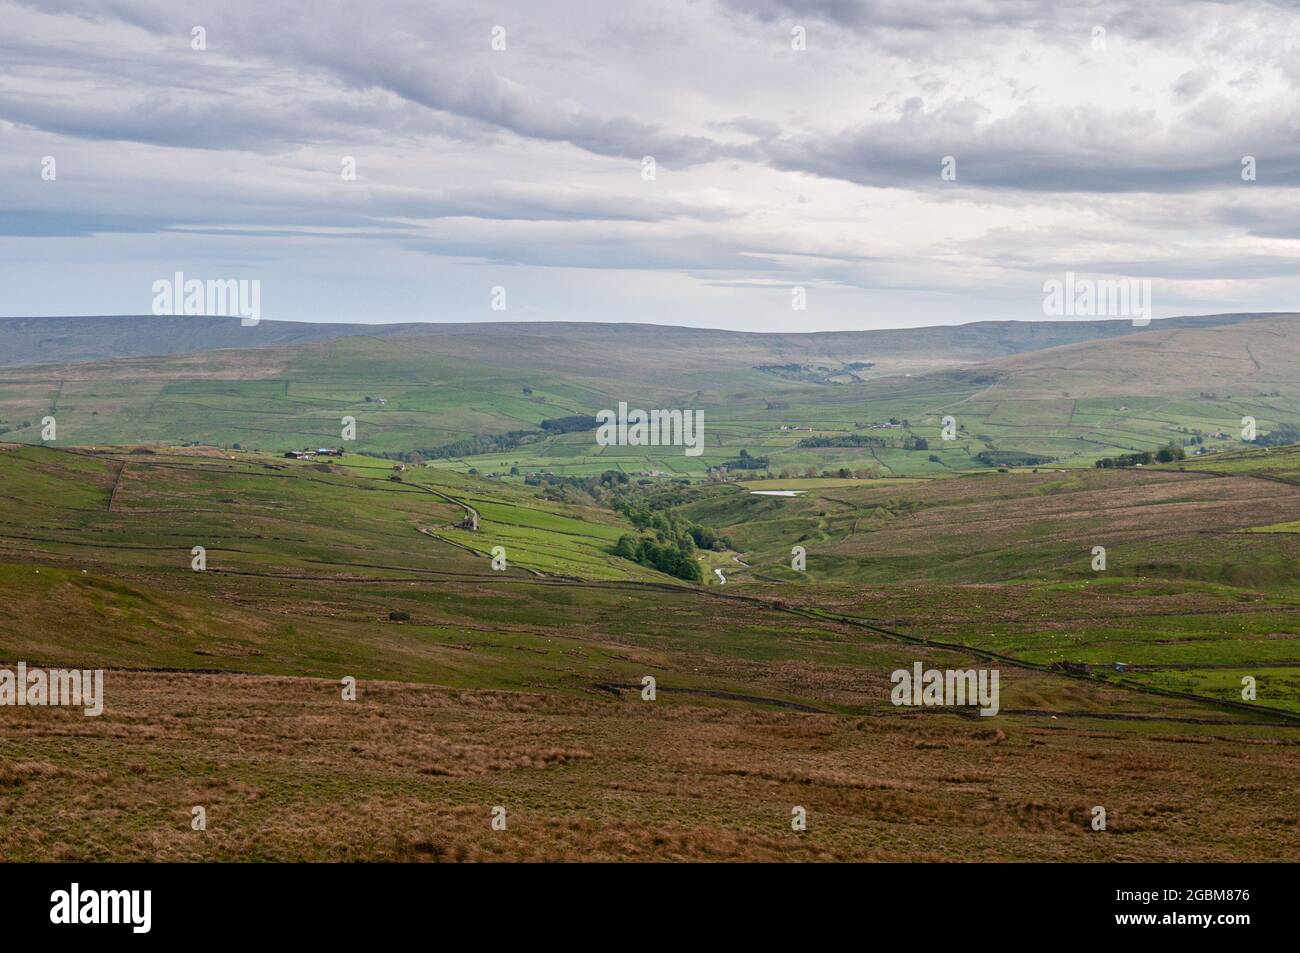 Sheep graze above Weardale valley in the moorland landscape of England's North Pennines hills. Stock Photo